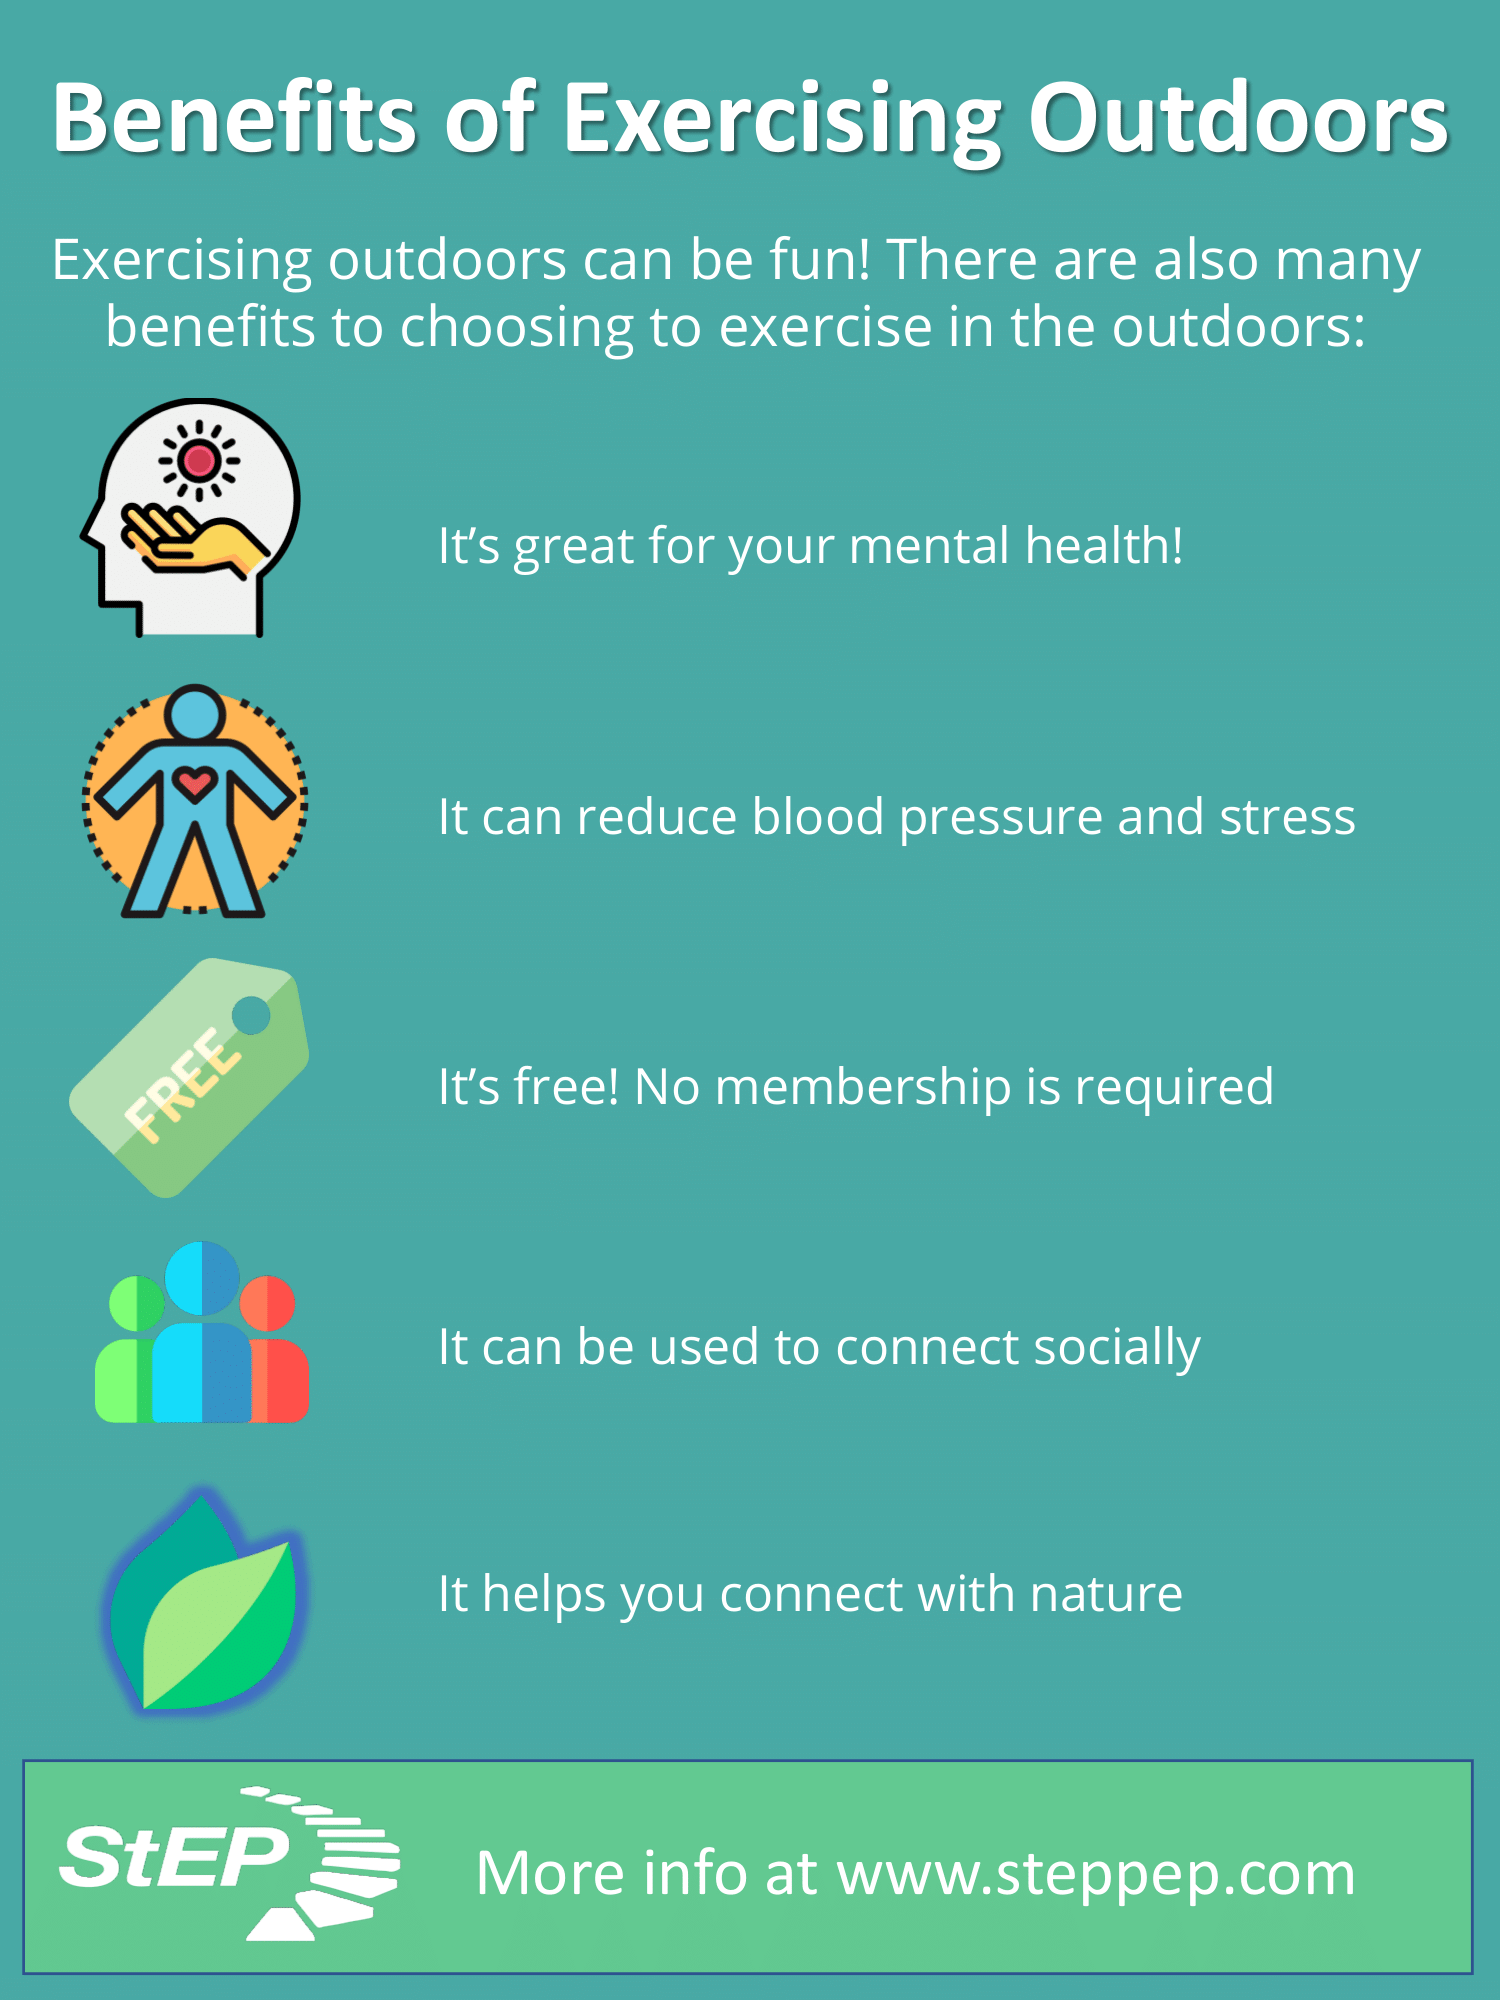 The Benefits of Exercising In Nature